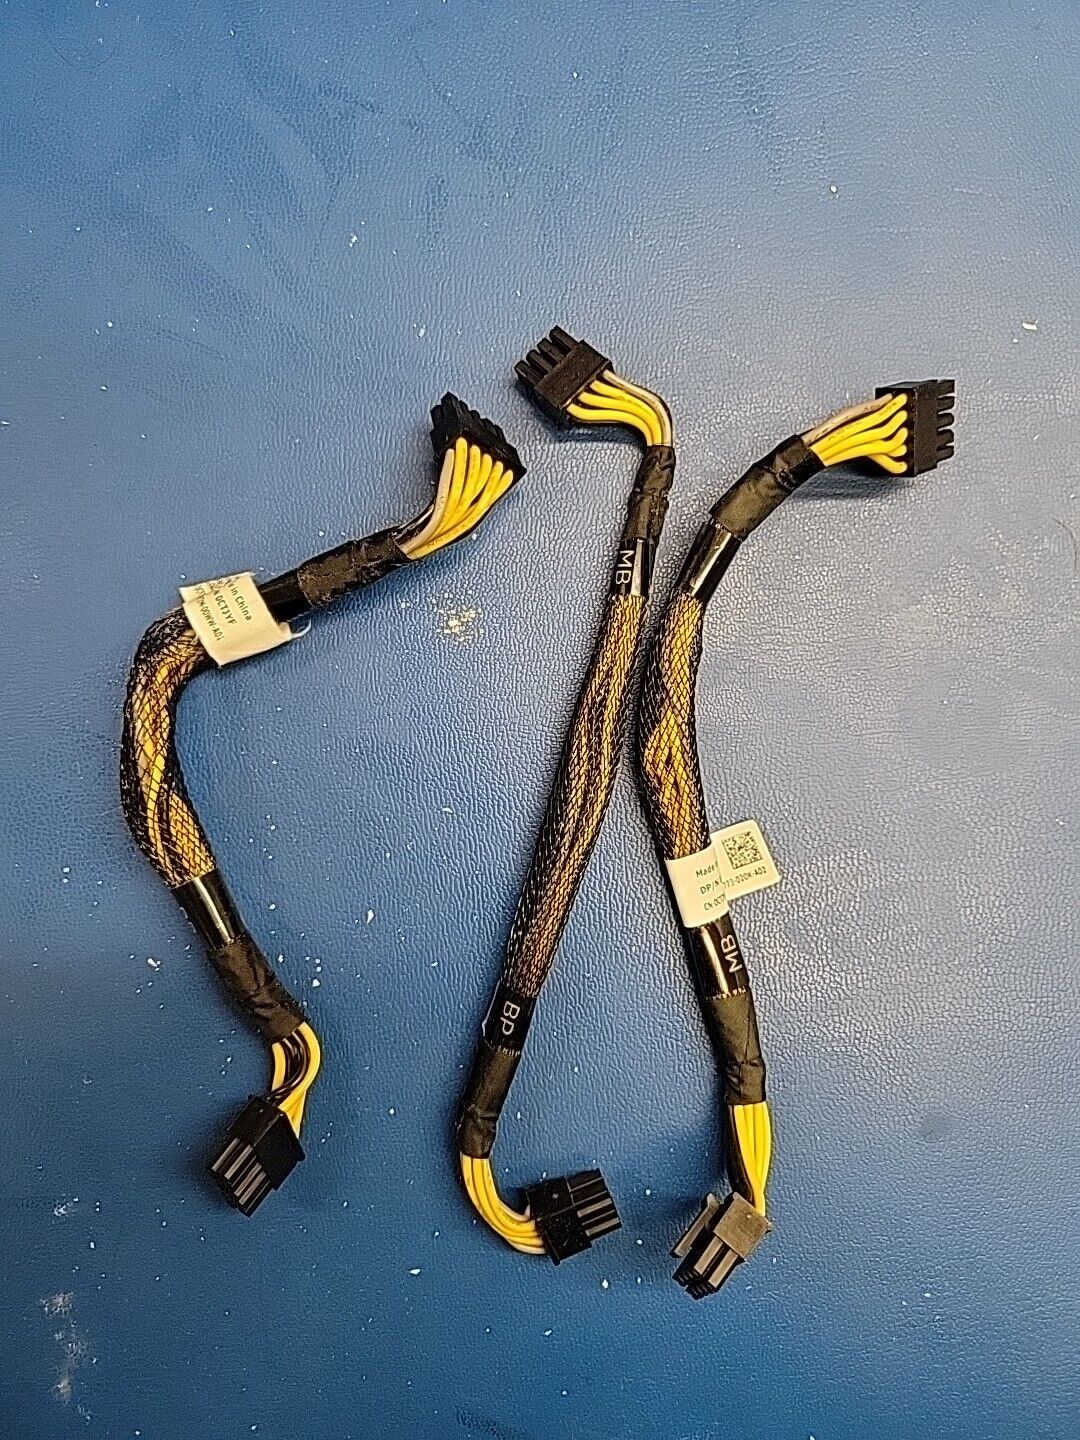 LOT OF 3 Dell CTJYF POWEREDGE R730 R730xd SERVER BP BACKPLANE POWER CABLE 10 PIN